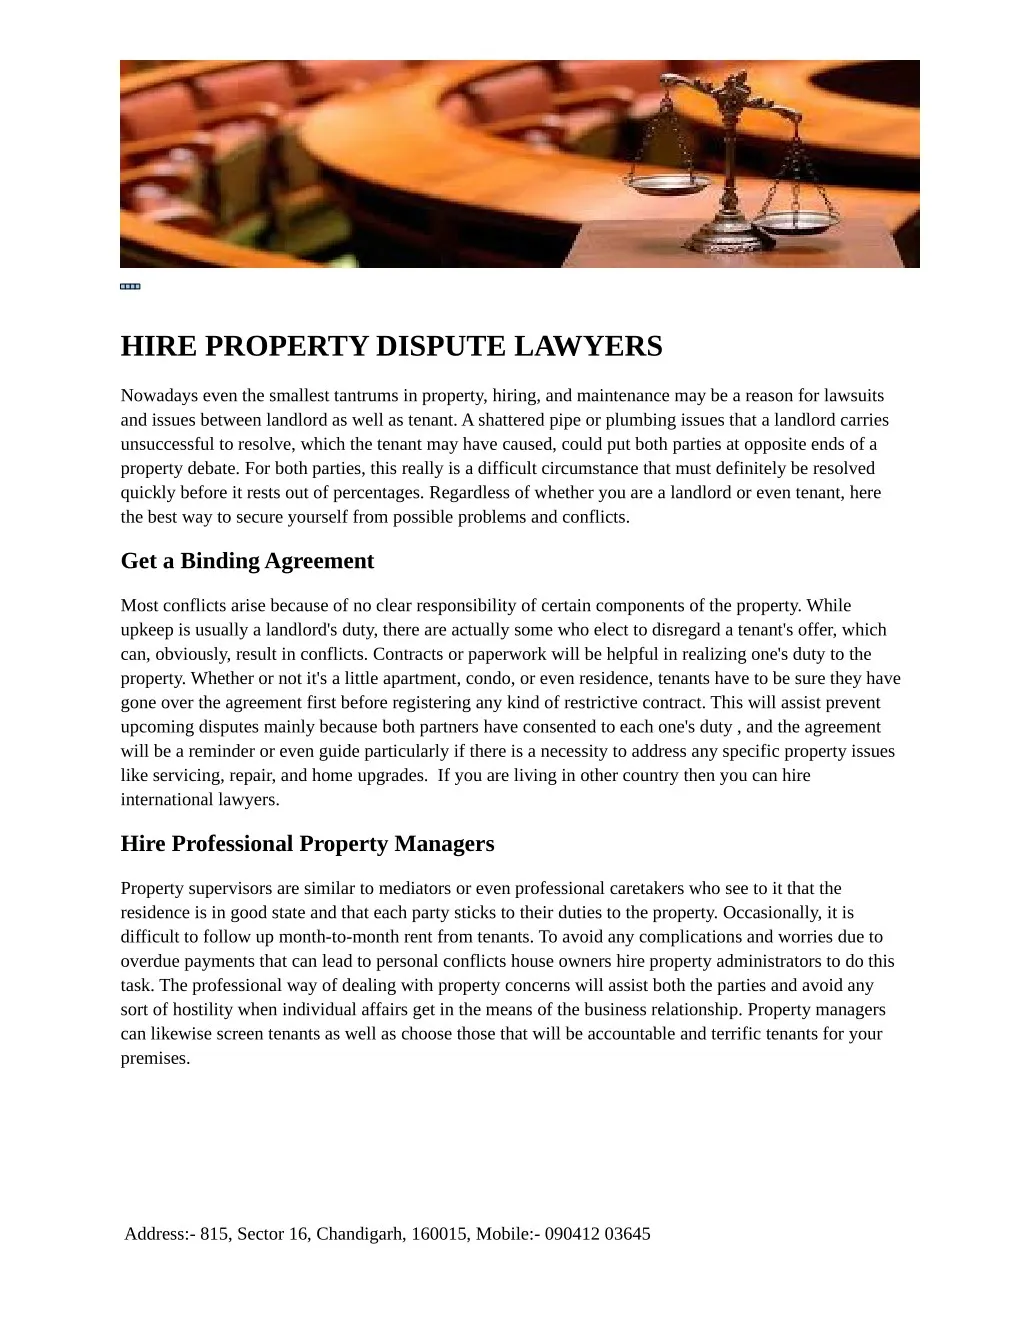 hire property dispute lawyers